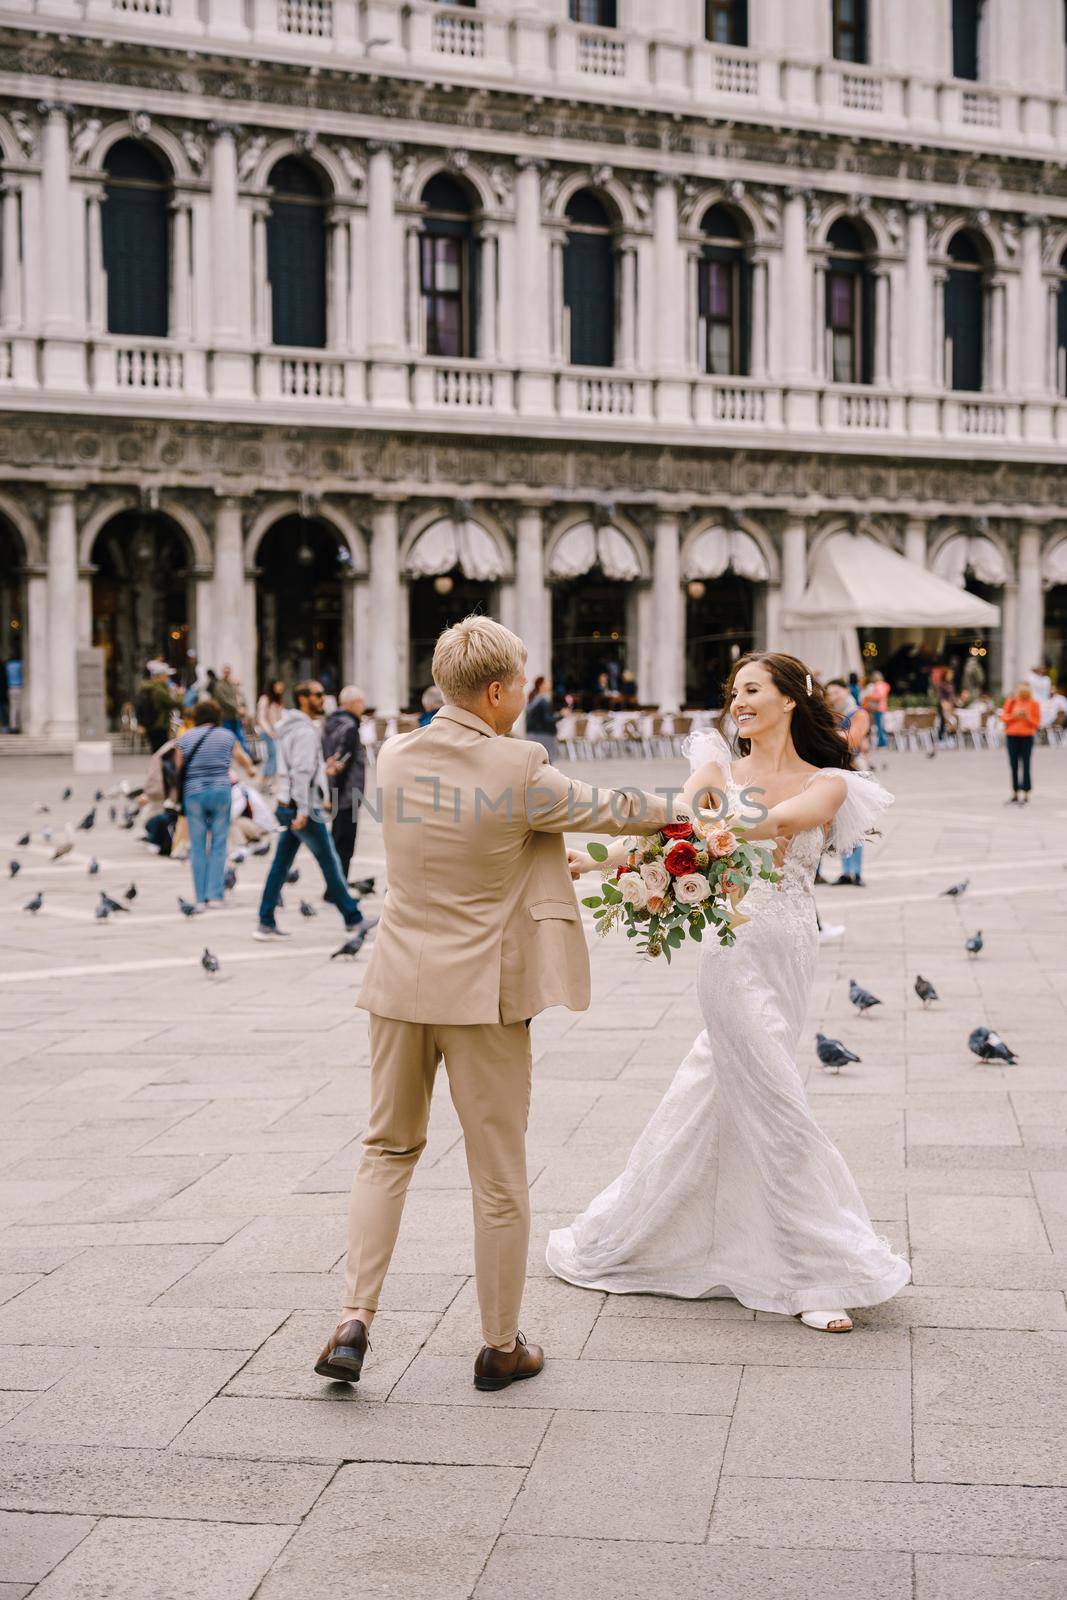 Venice, Italy - 04 october 2019: Wedding in Venice, Italy. The bride and groom are dancing among the many pigeons in Piazza San Marco, against the backdrop of National Archaeological Museum Venice by Nadtochiy